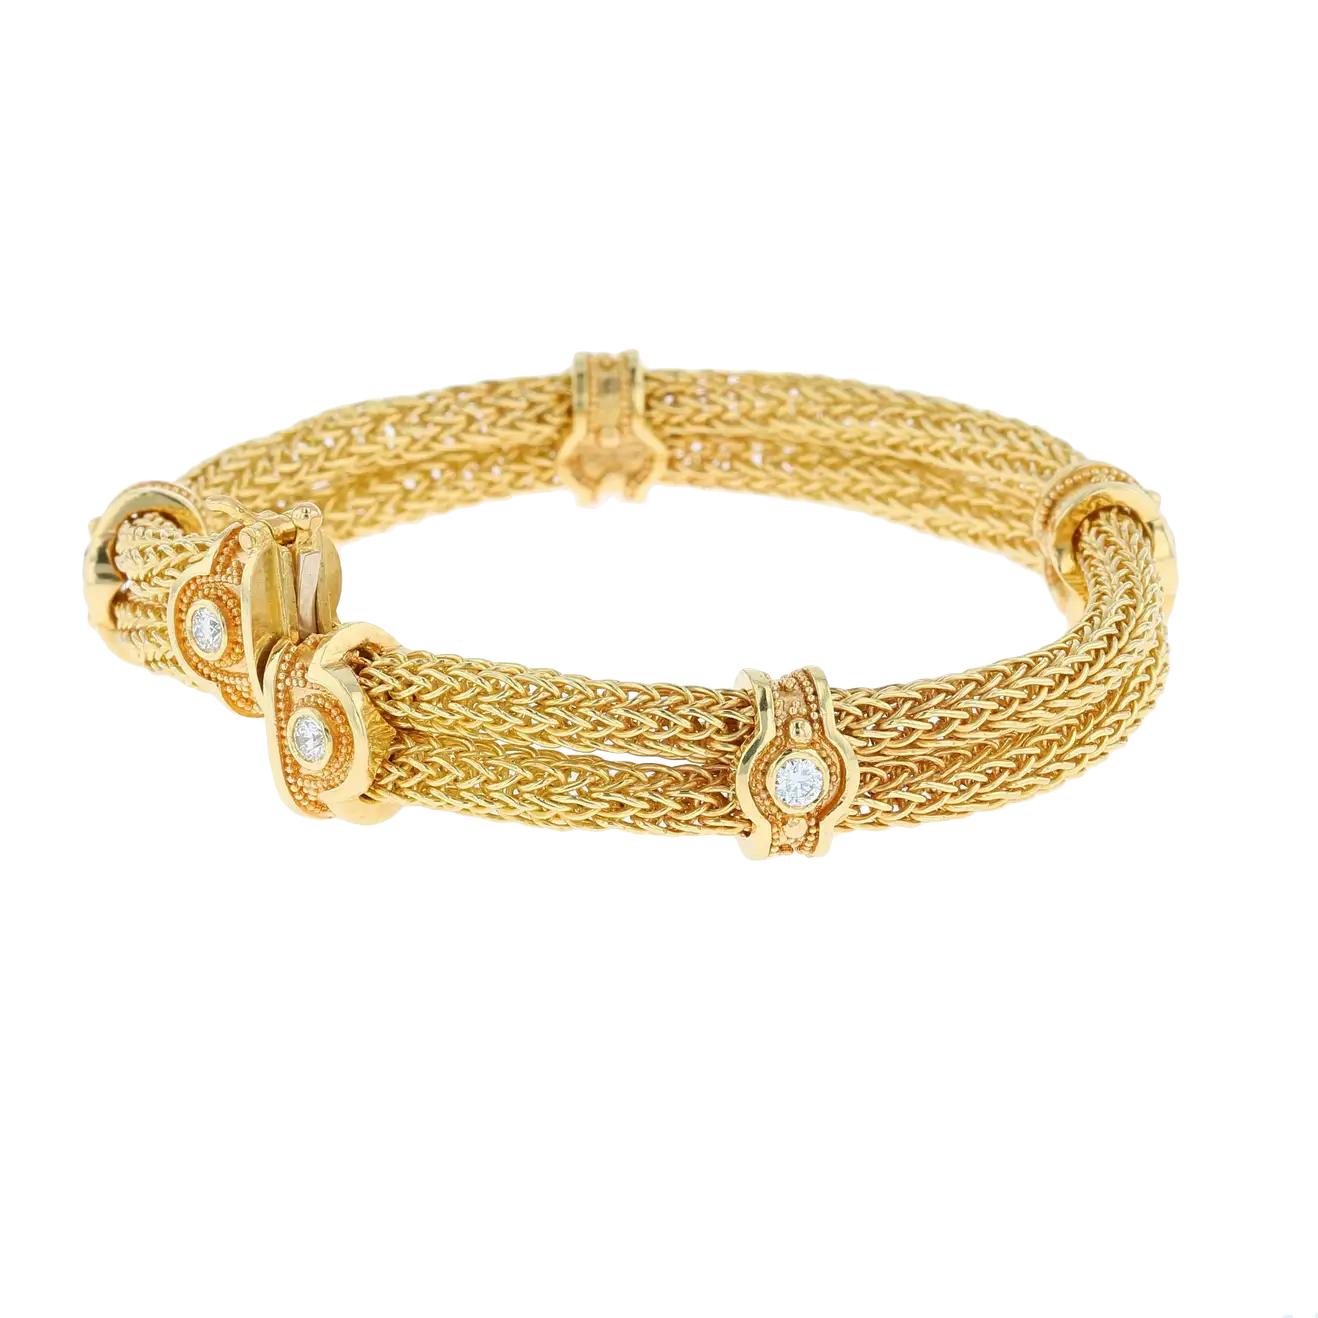 Women's or Men's Kent Raible Double Woven Chain Bracelet with Diamonds and Gold Granulation For Sale